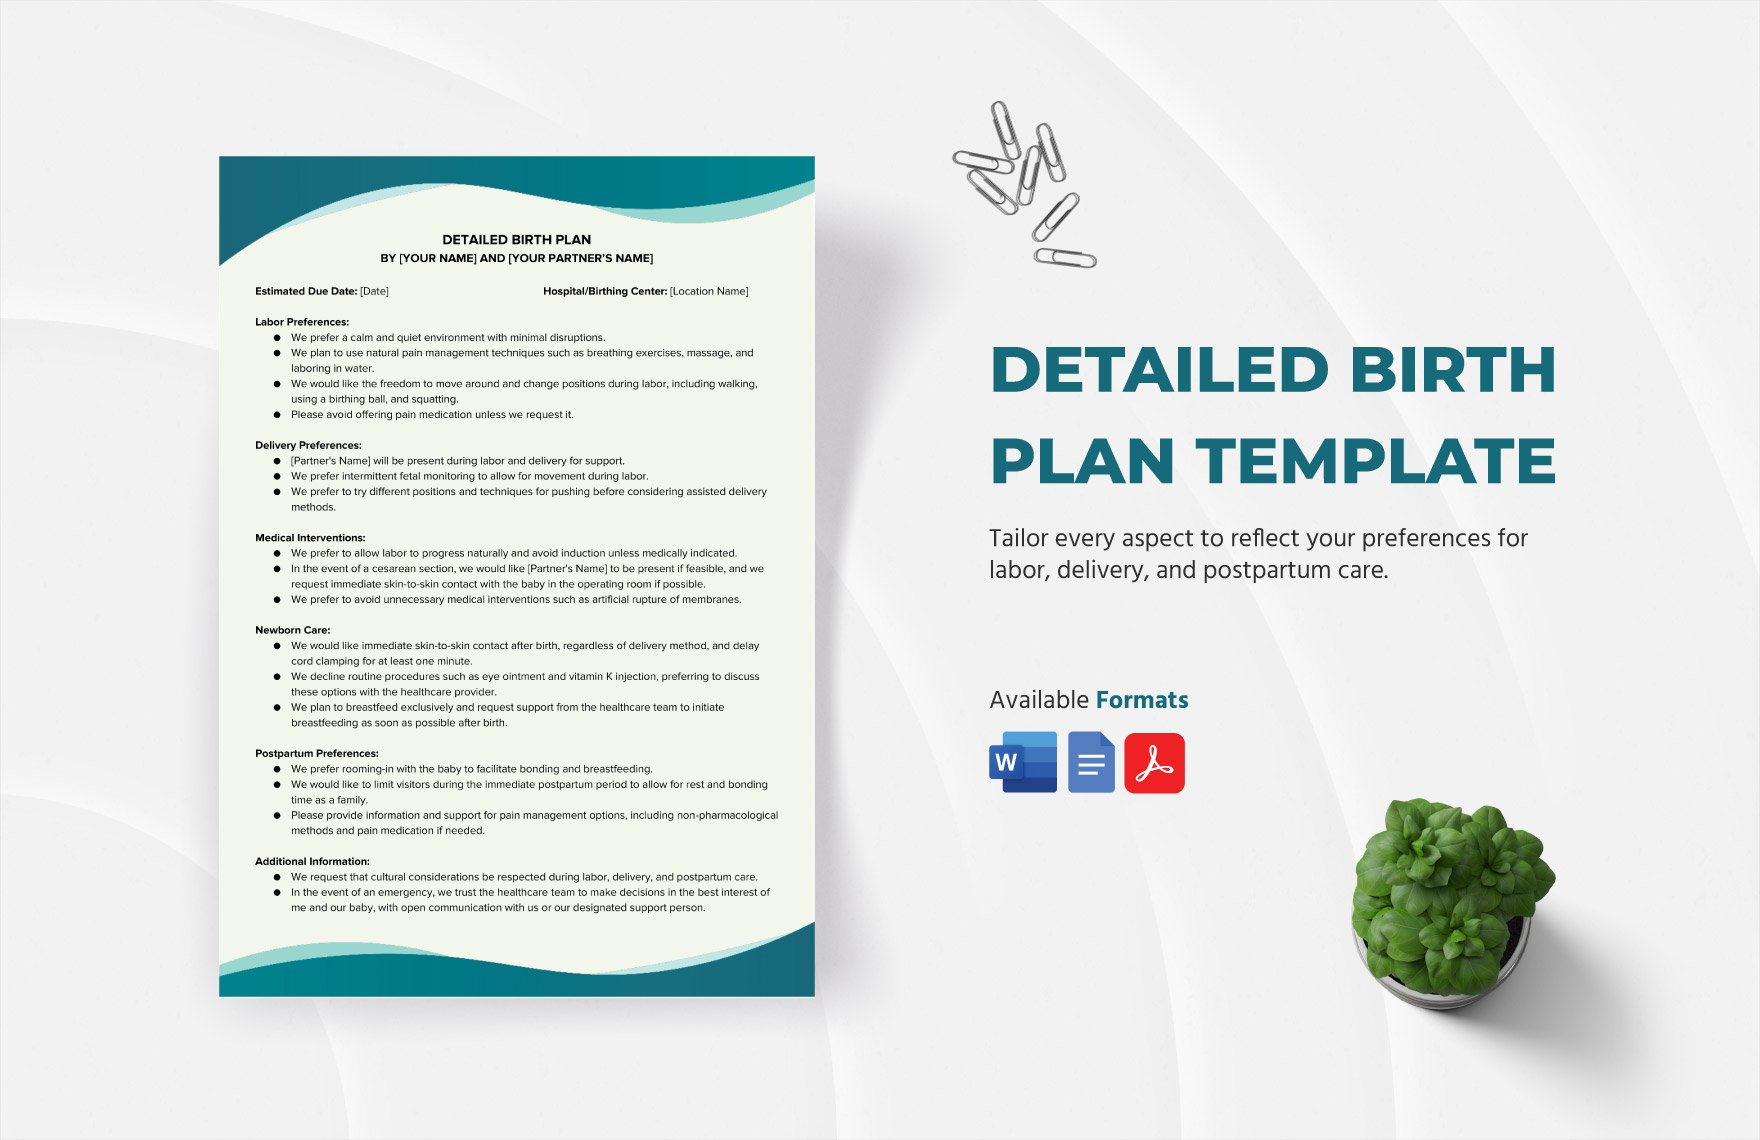 Detailed Birth Plan Template in Word, Google Docs, PDF